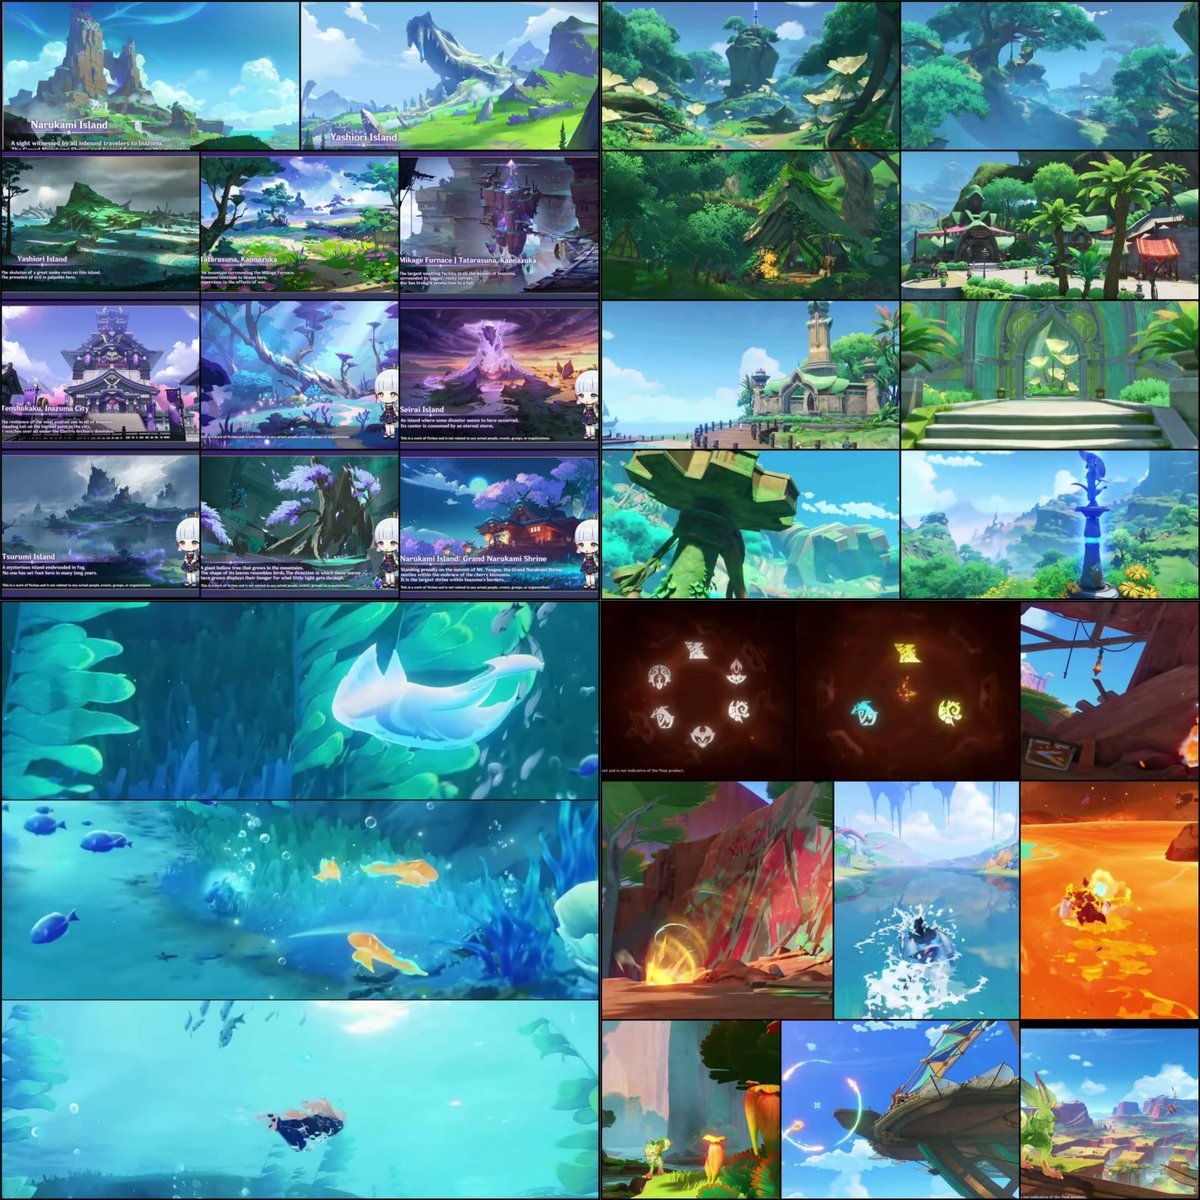 ✨ Every nation/region livestream teaser ✨ Inazuma is still the best for me i remember back how I was making plans just to explore some islands because it was rumoured to be hard ©️ Chung Wei Foong #Genshinlmpact #Genshin #GenshinMemes